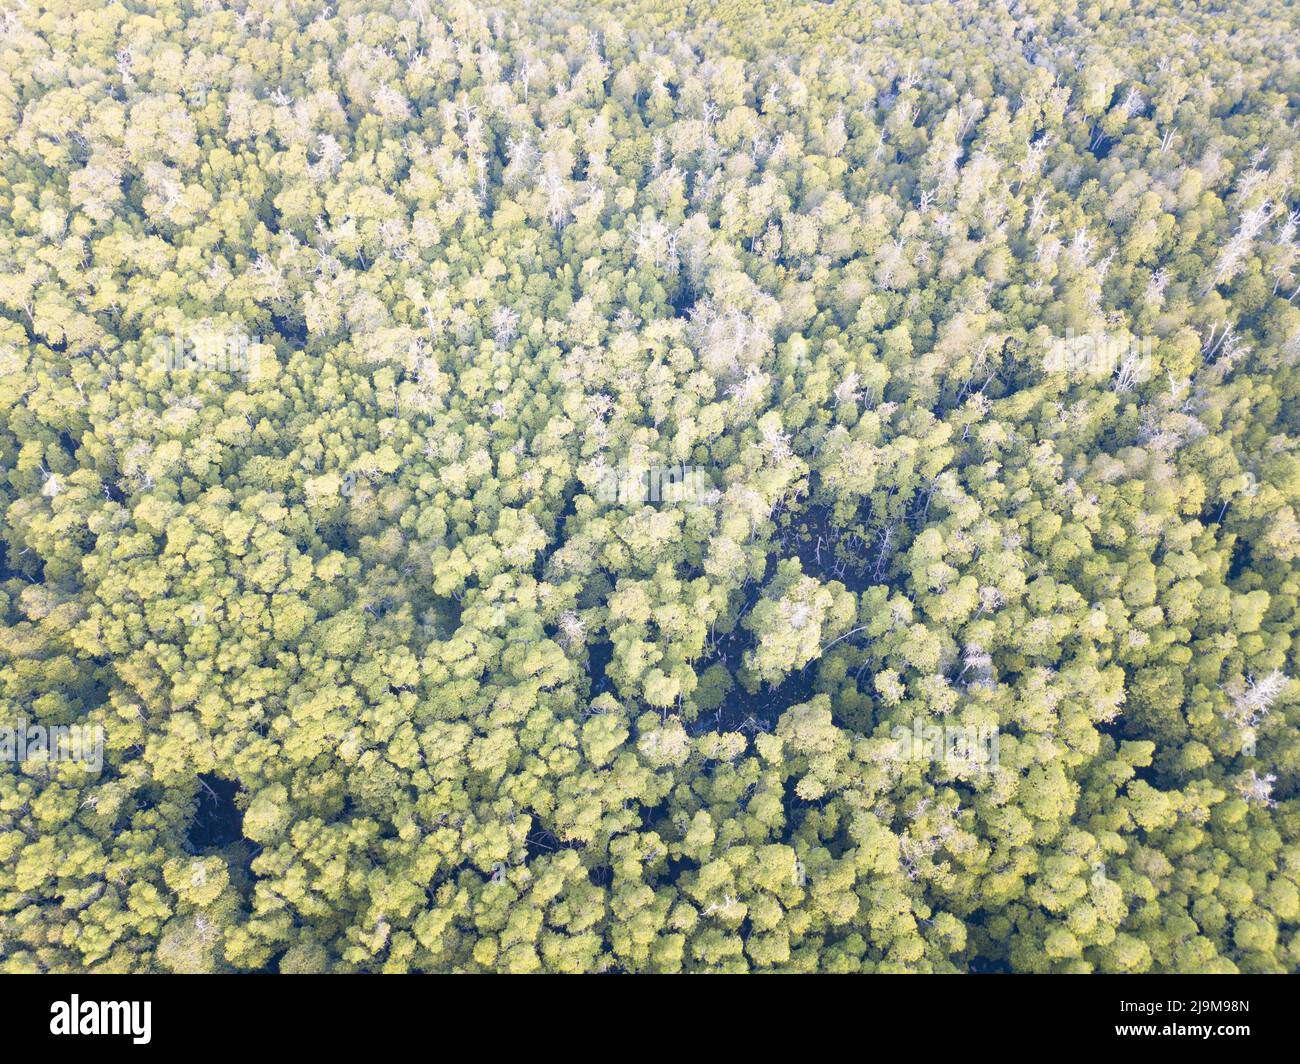 An extensive mangrove forest grows along the shallow coast of a remote Indonesian island. Mangrove forests provide habitat for many marine species. Stock Photo